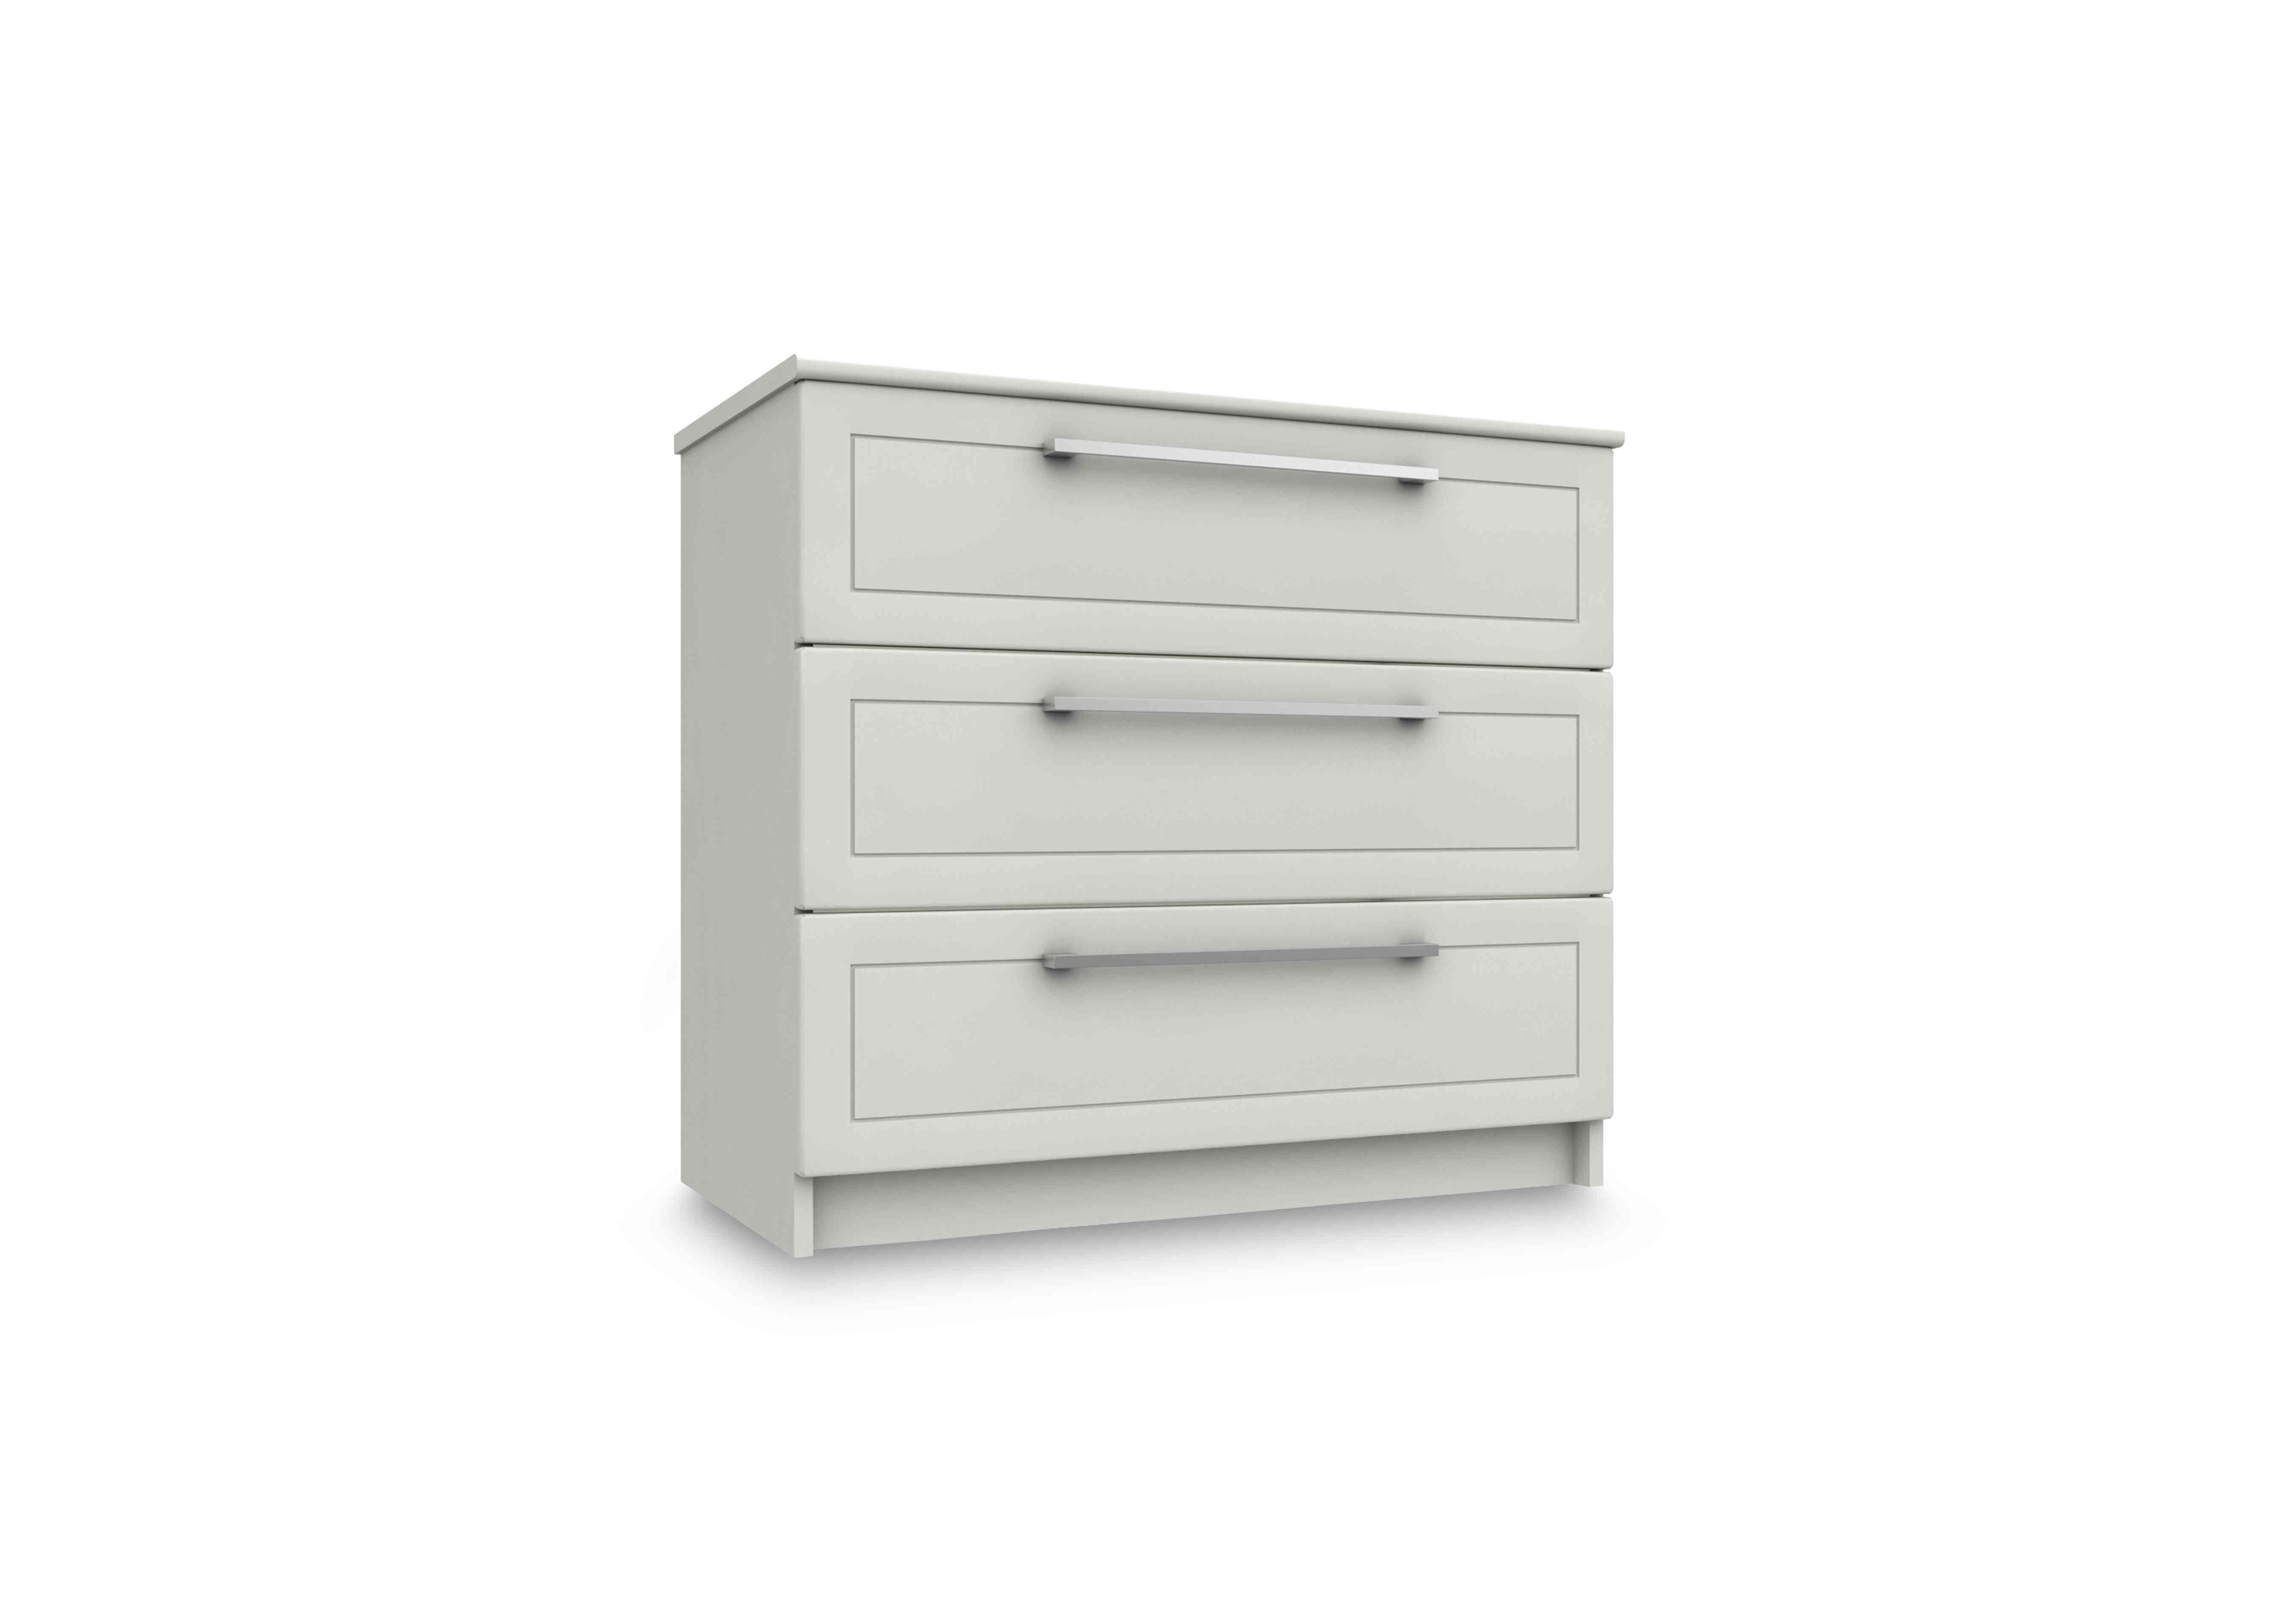 Bexley 3 Drawer Chest in White Gloss on Furniture Village